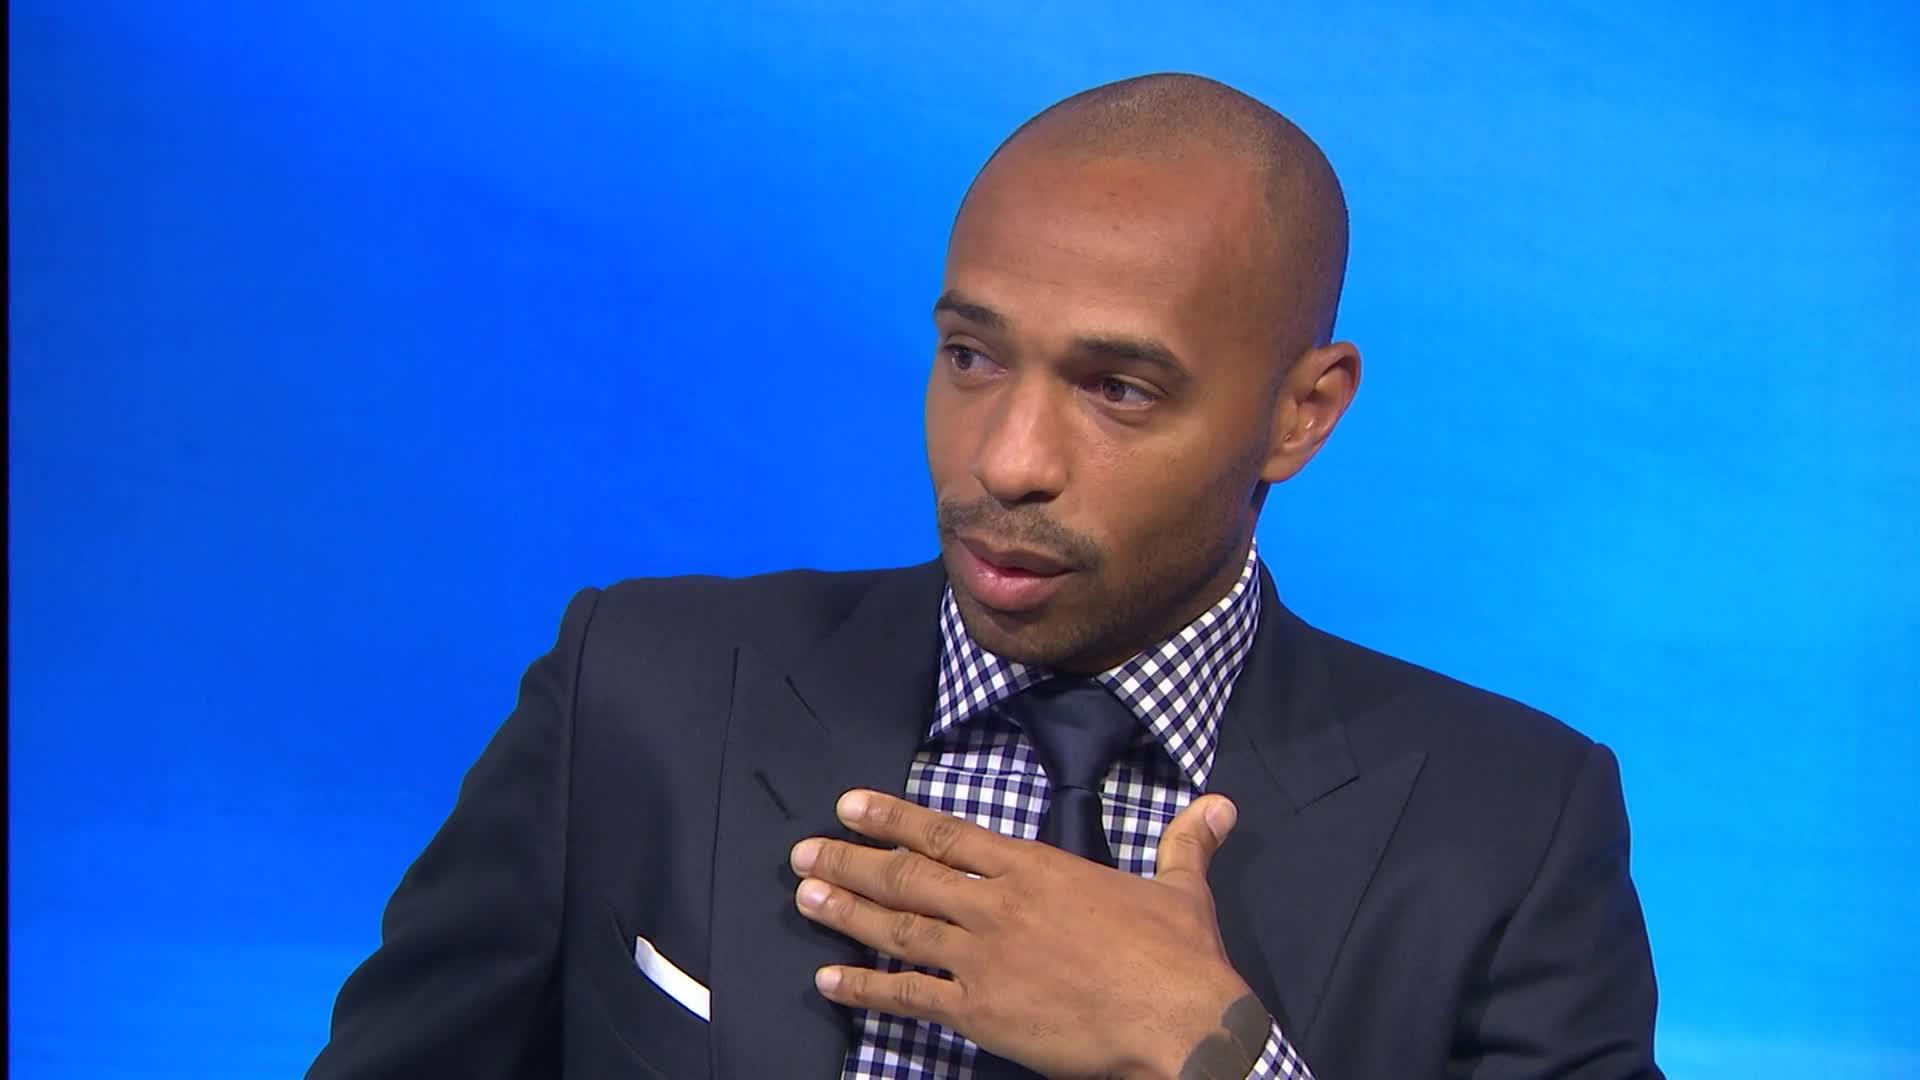 Thierry Henry in an interview